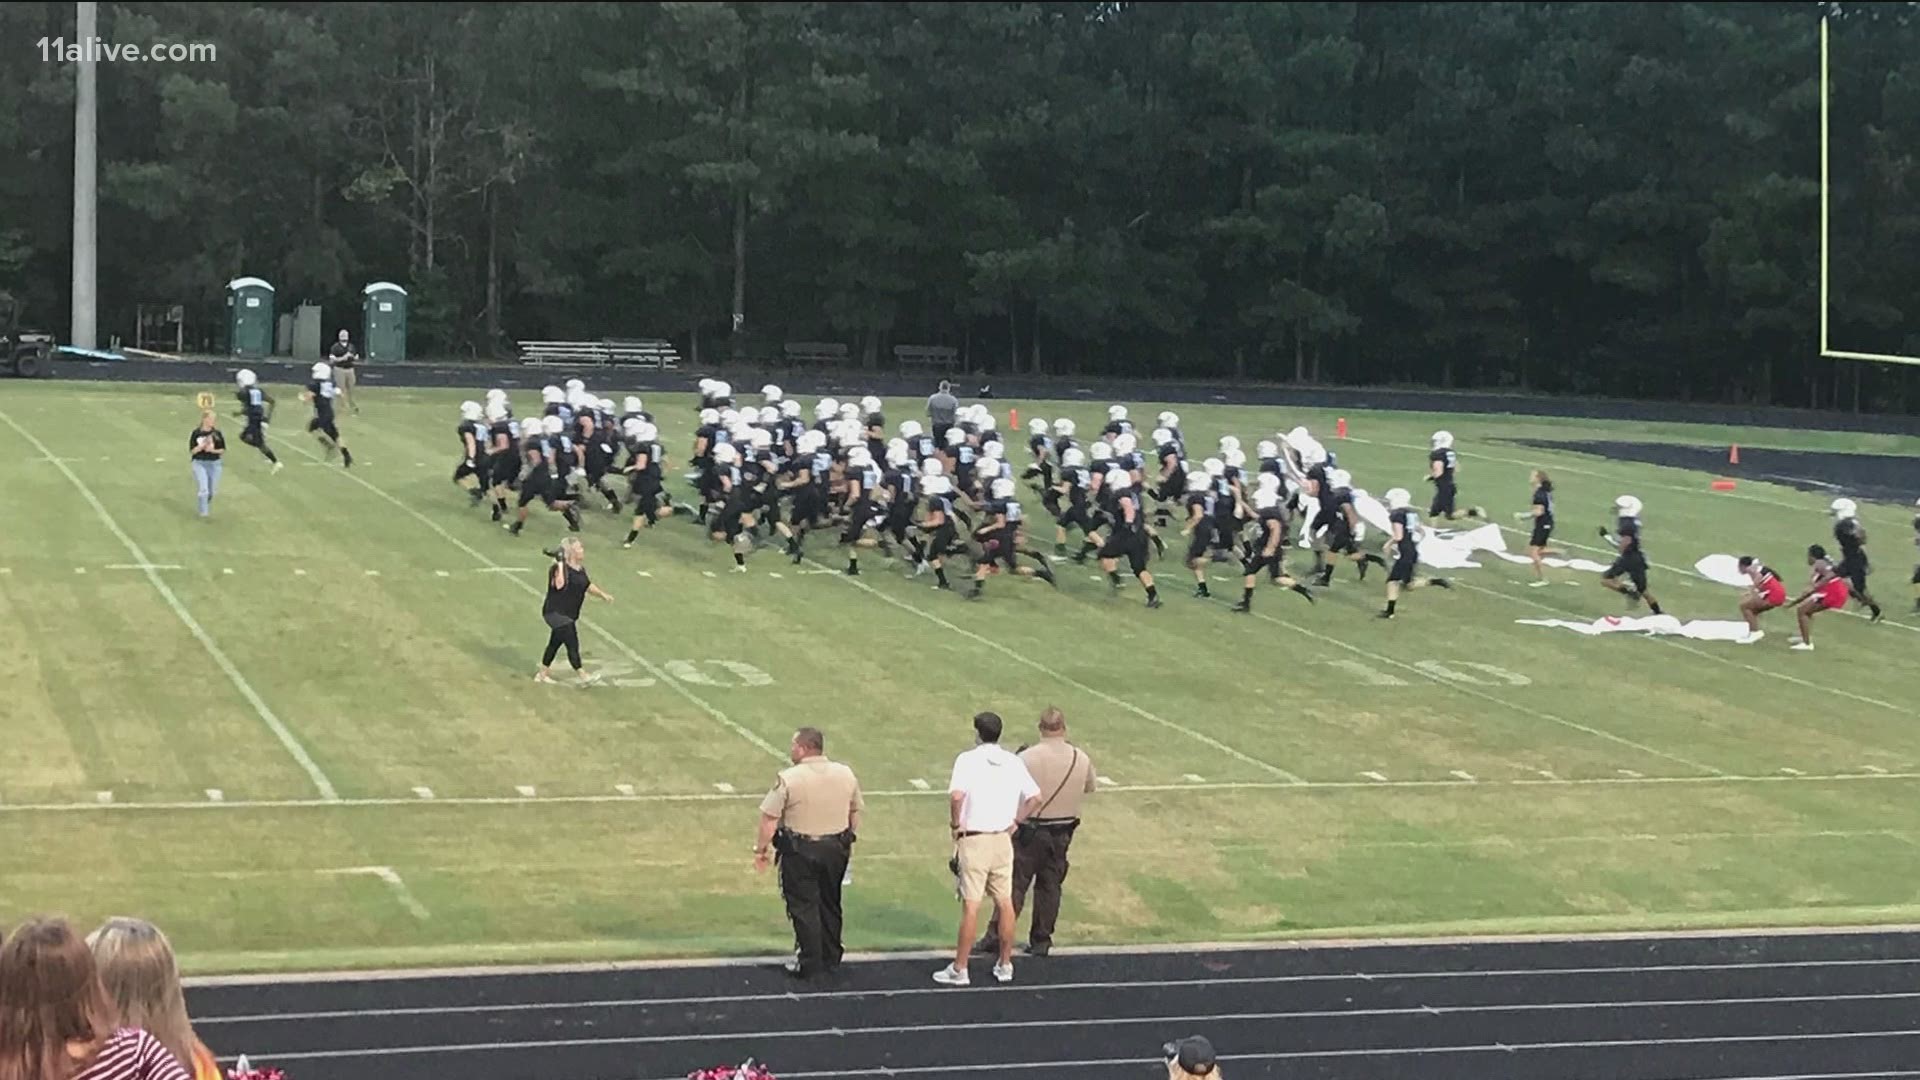 Some high school parents in Jackson County are upset over what they call “racist” comments from a football announcer at a game.